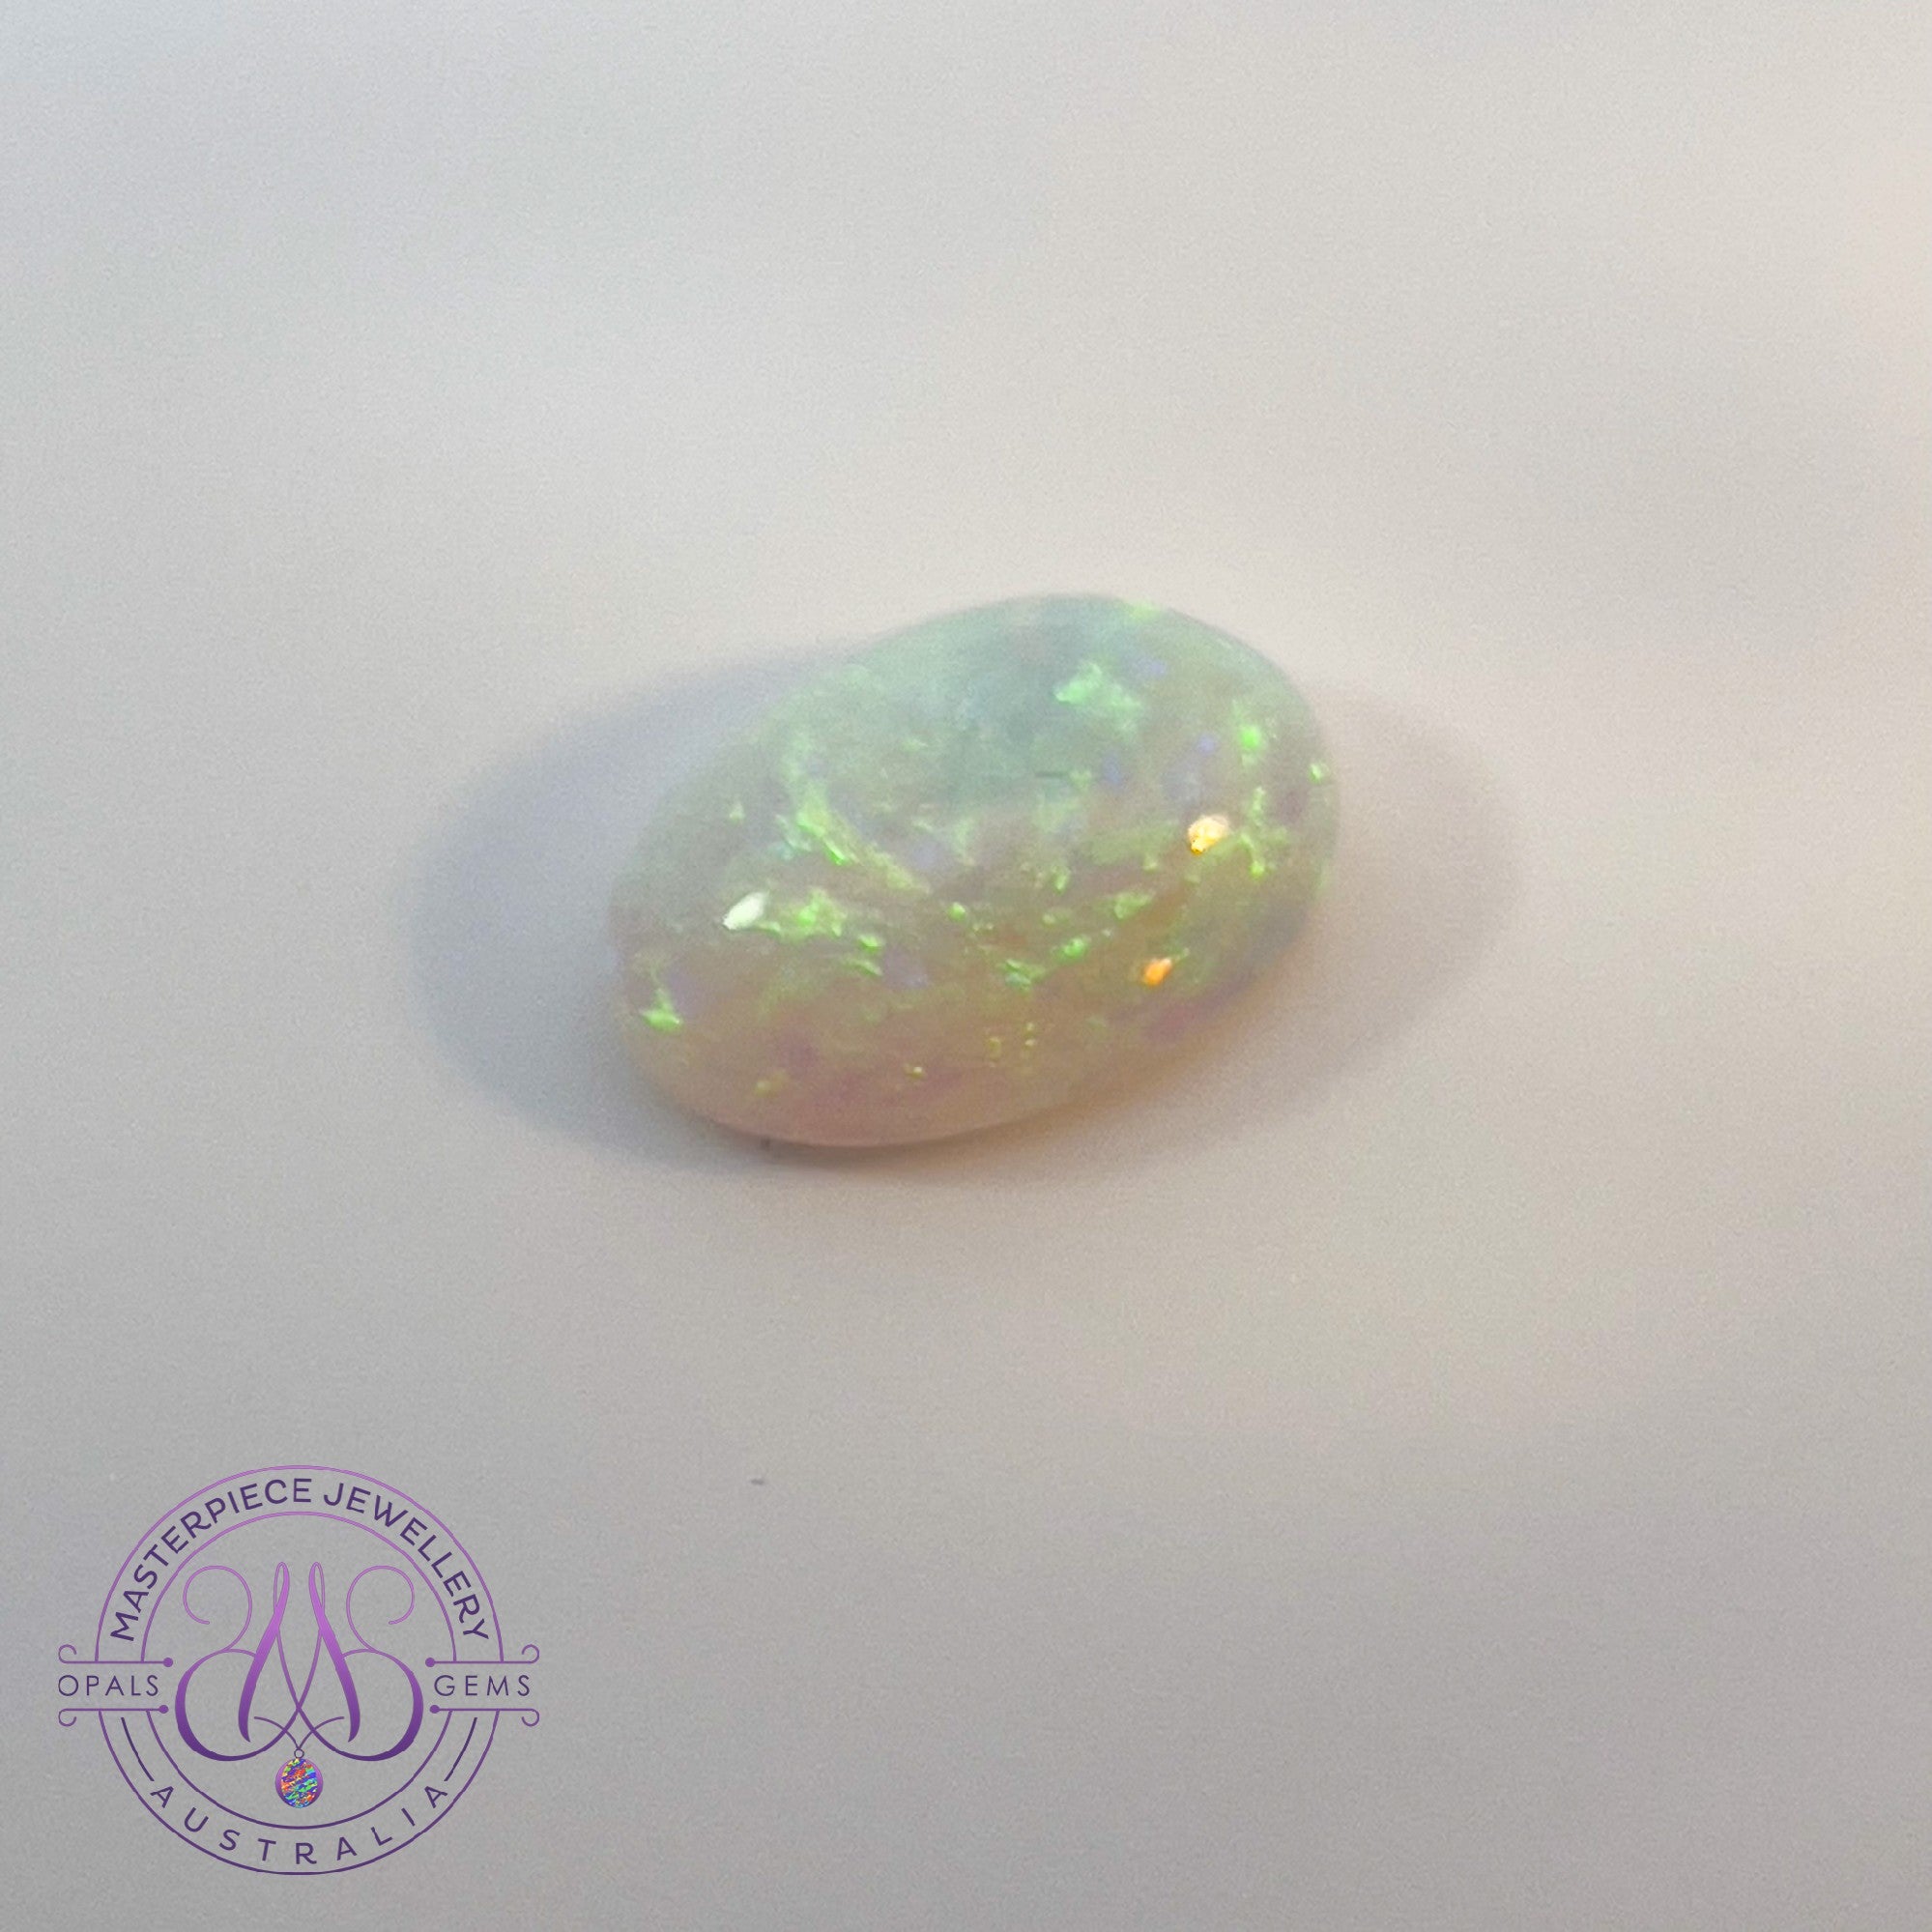 One Oval White Opal 5.86ct